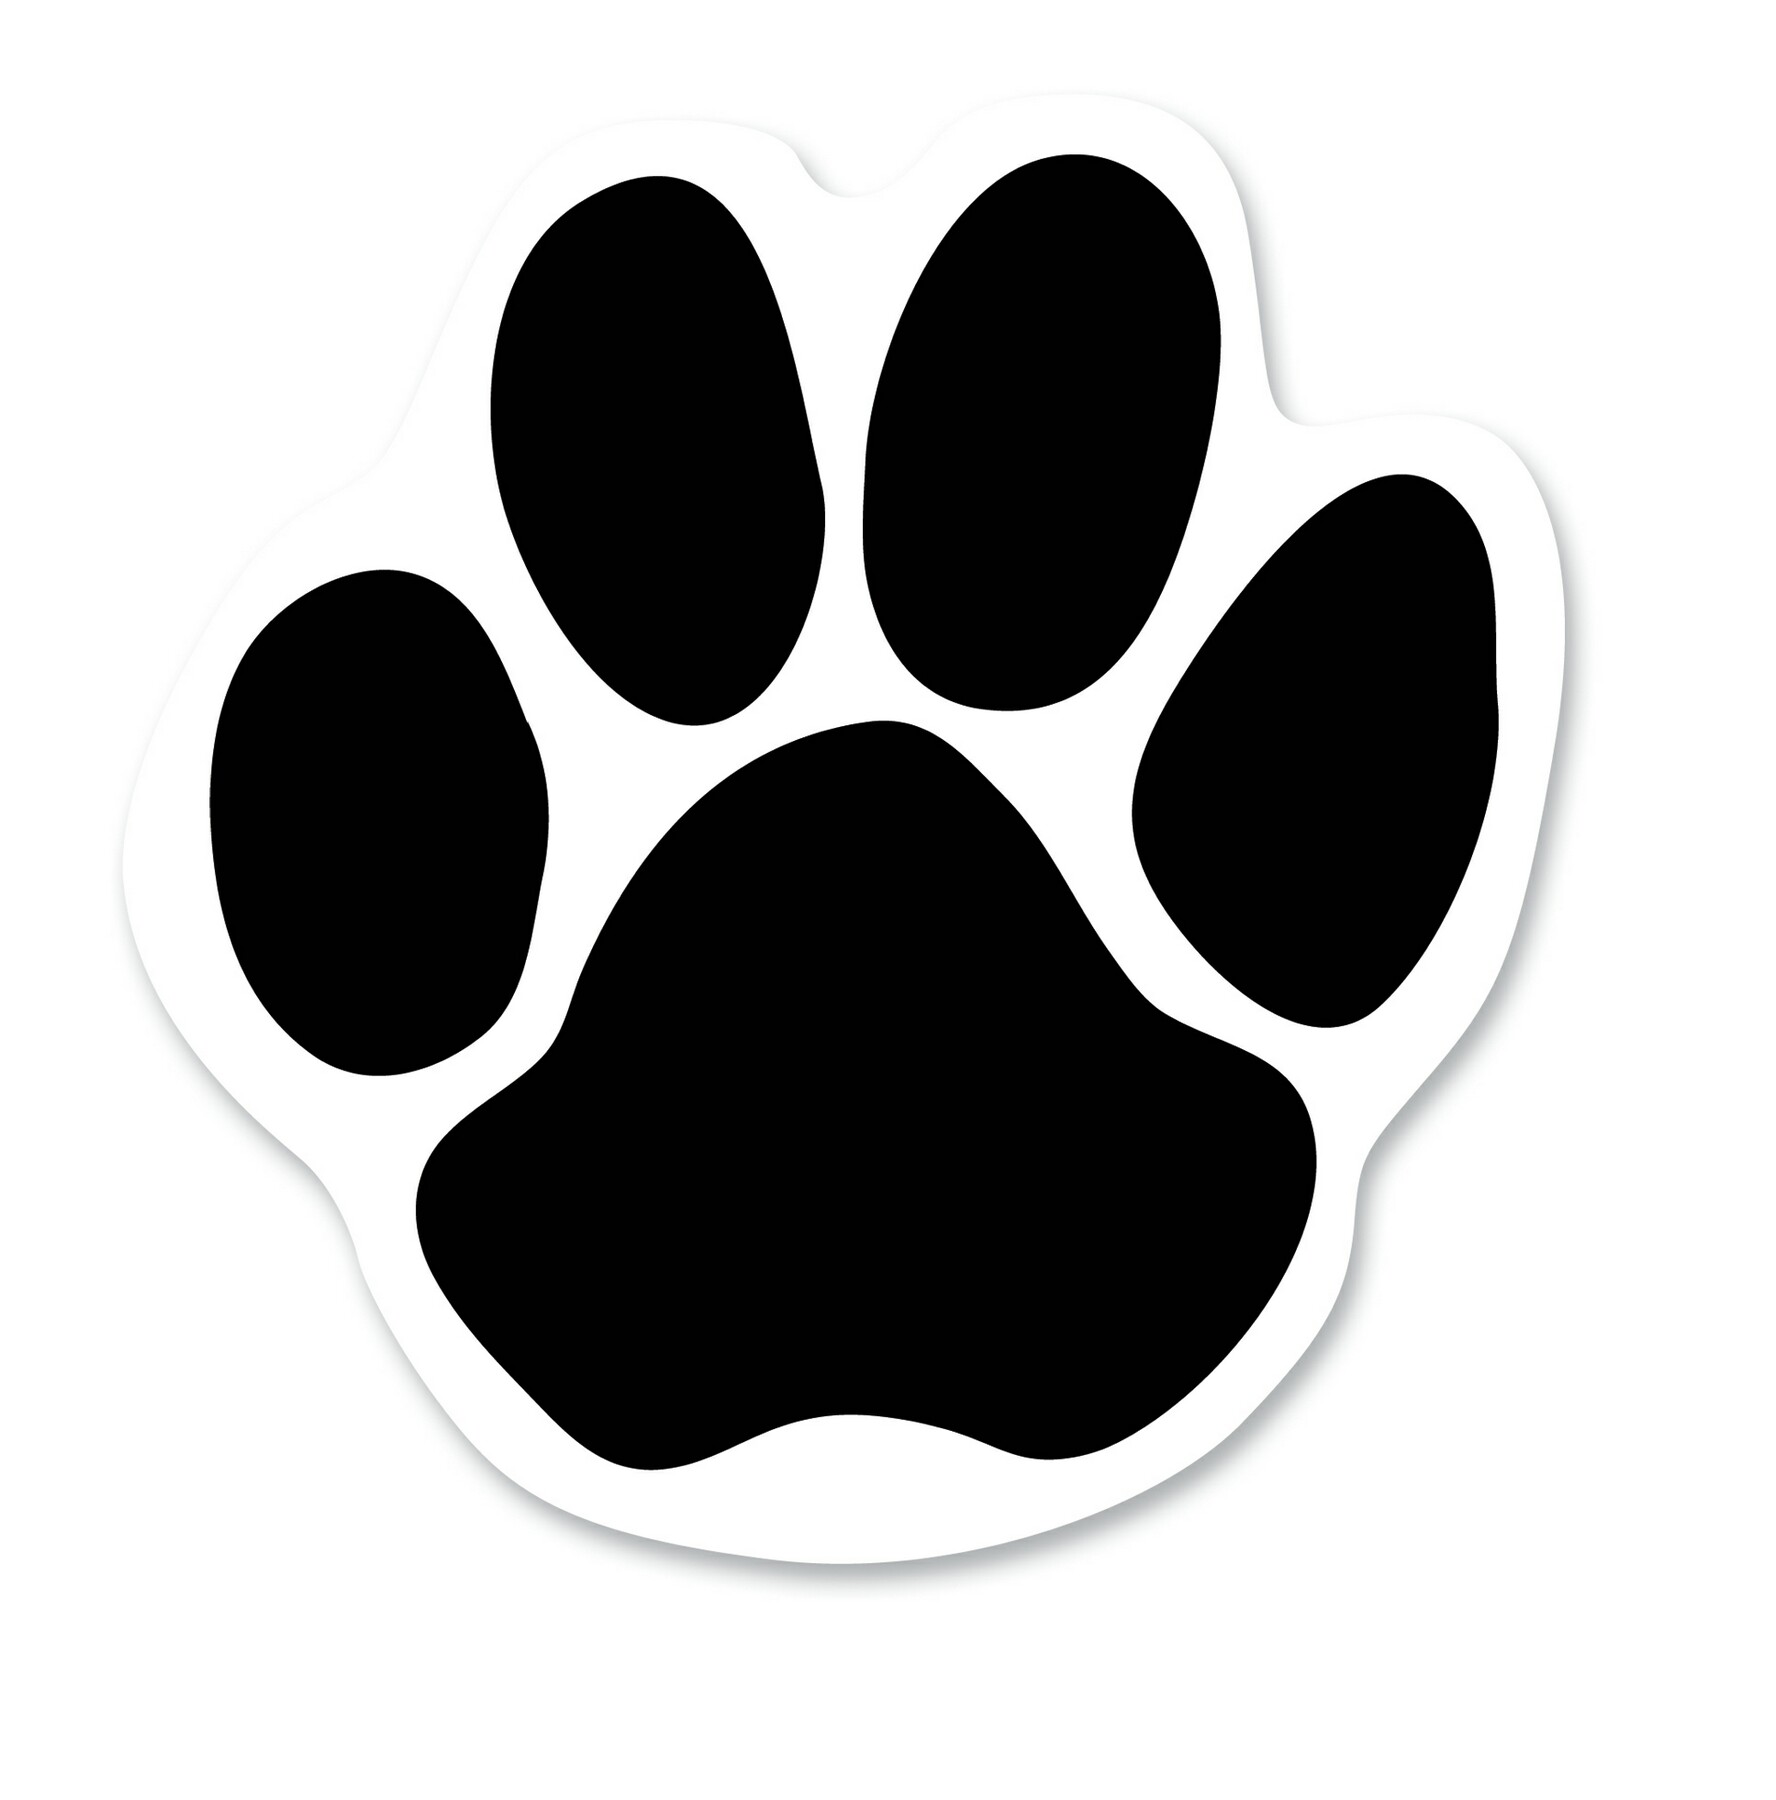 Outline Of A Paw Print - Clipart library